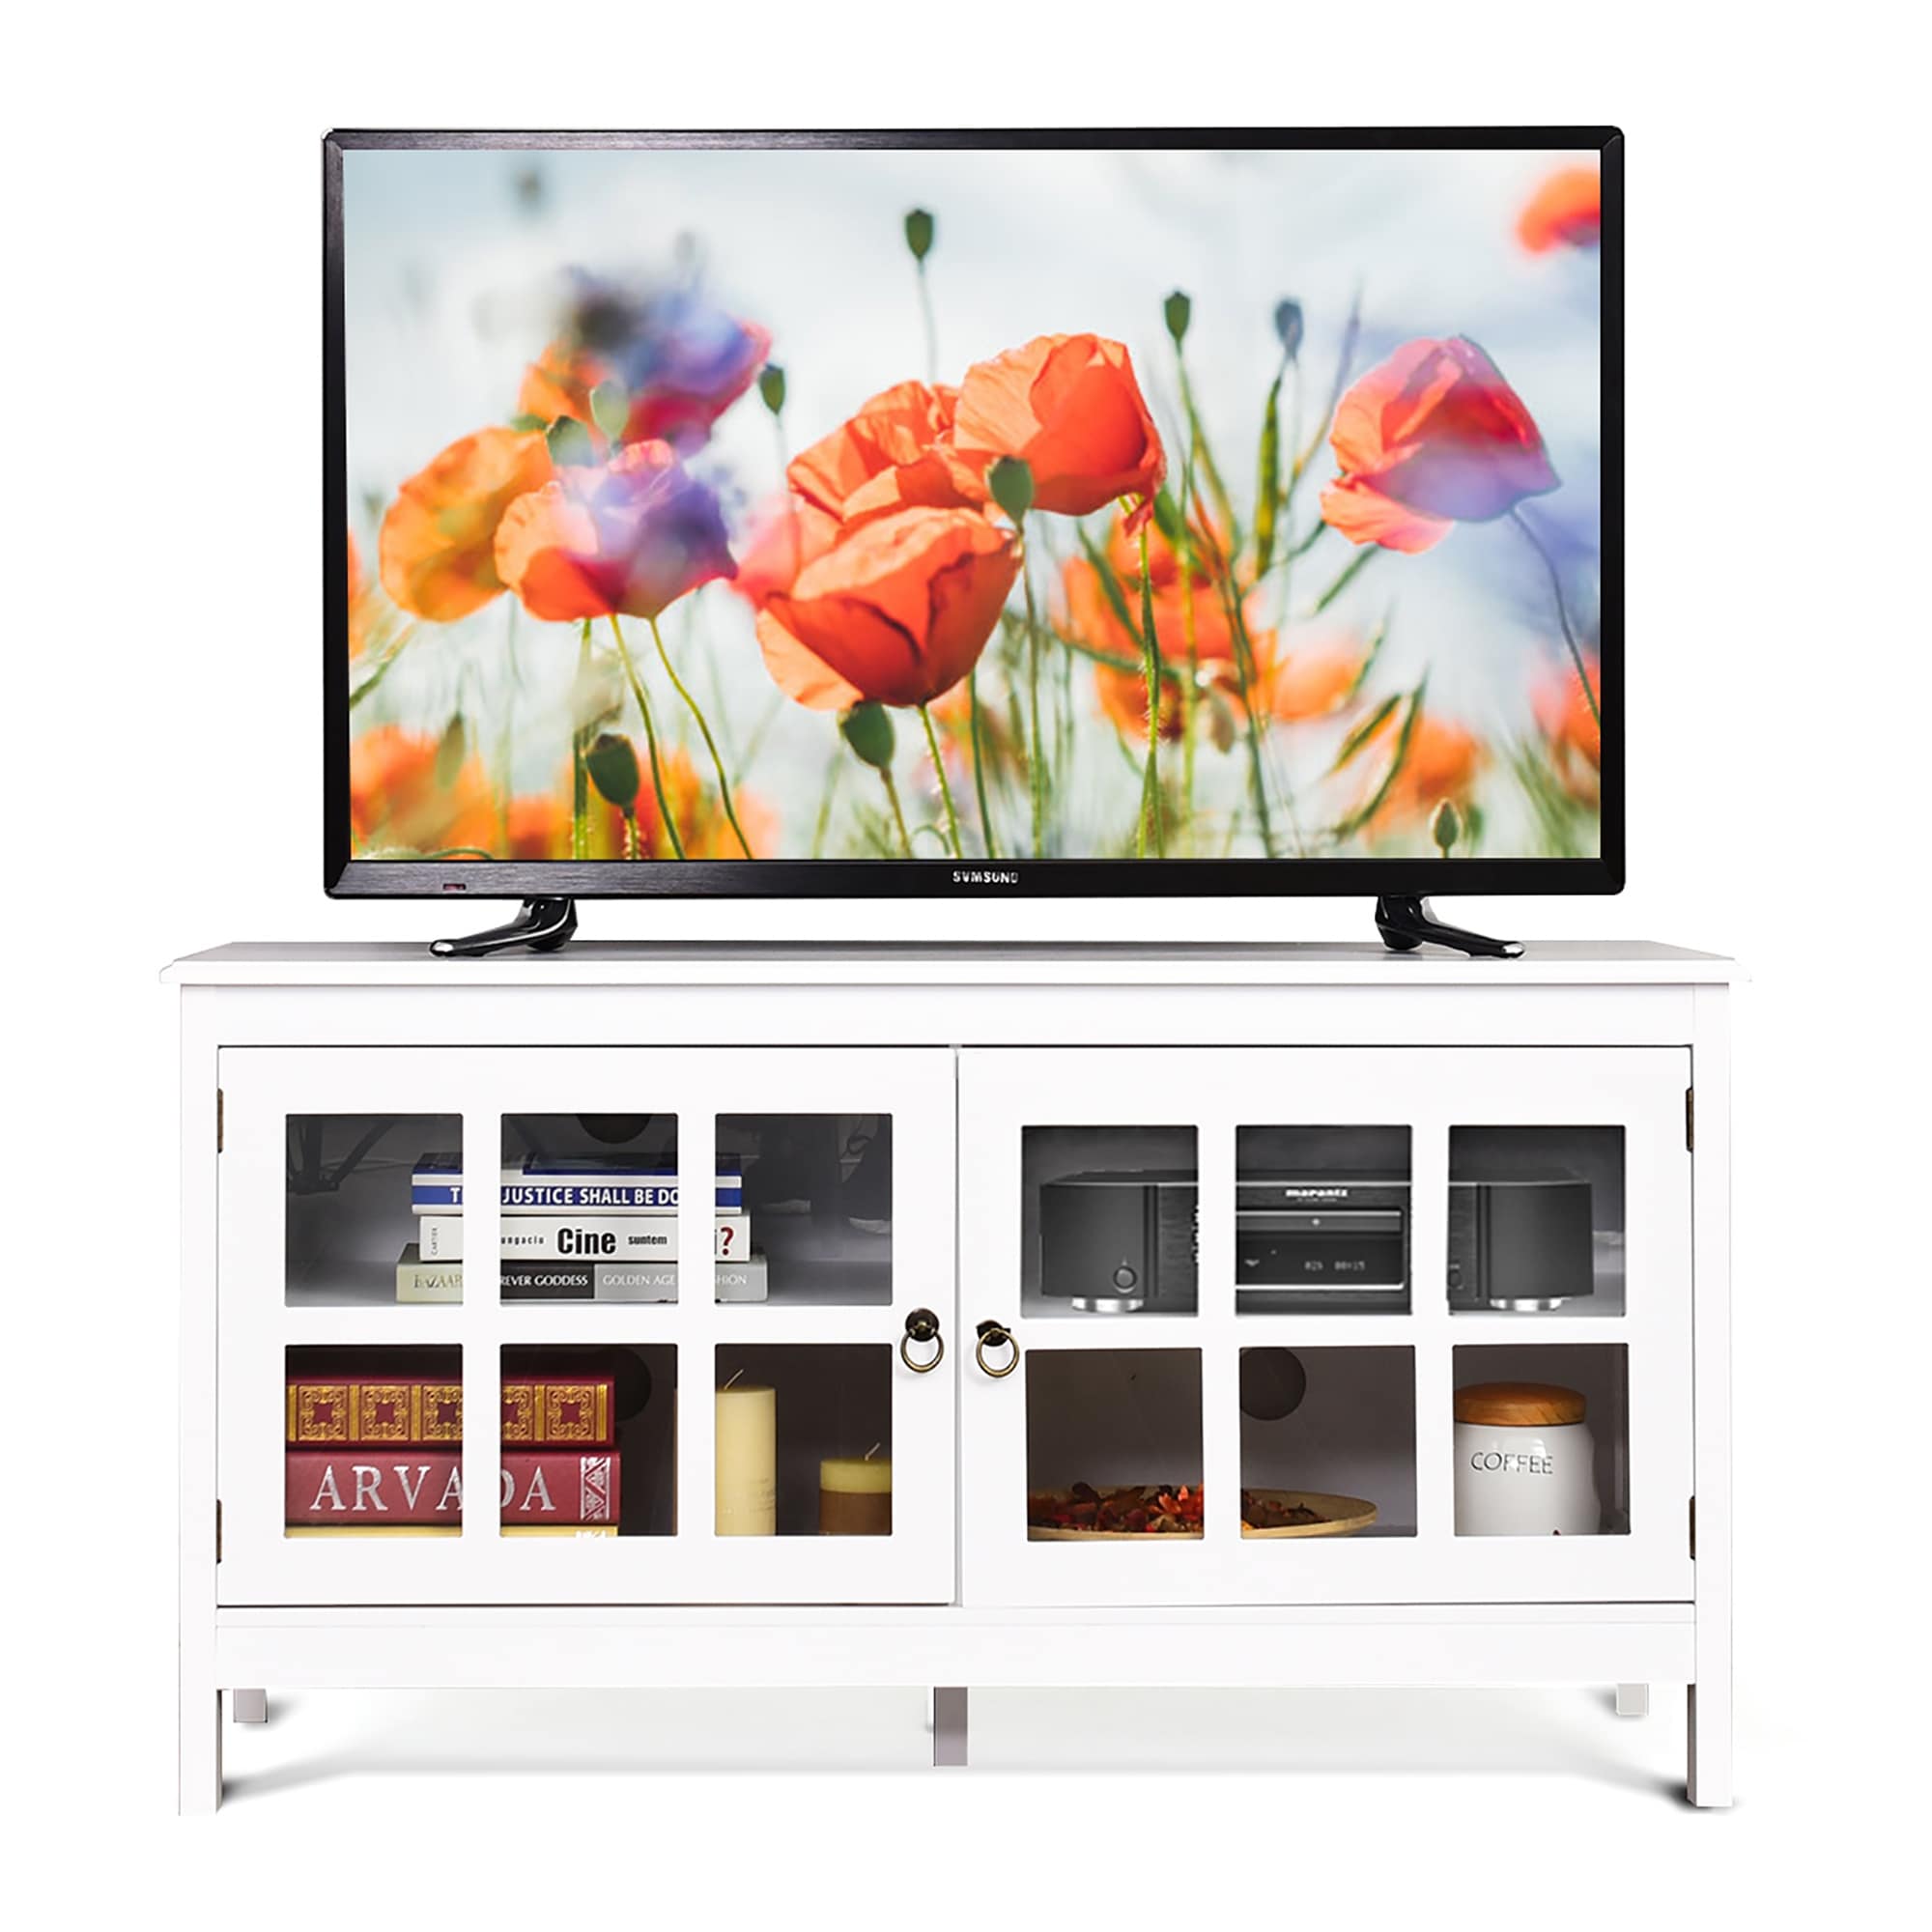 Details about   TV Entertainment Center Unit Stand Storage Cabinet Wood Console 70 inch Brown 